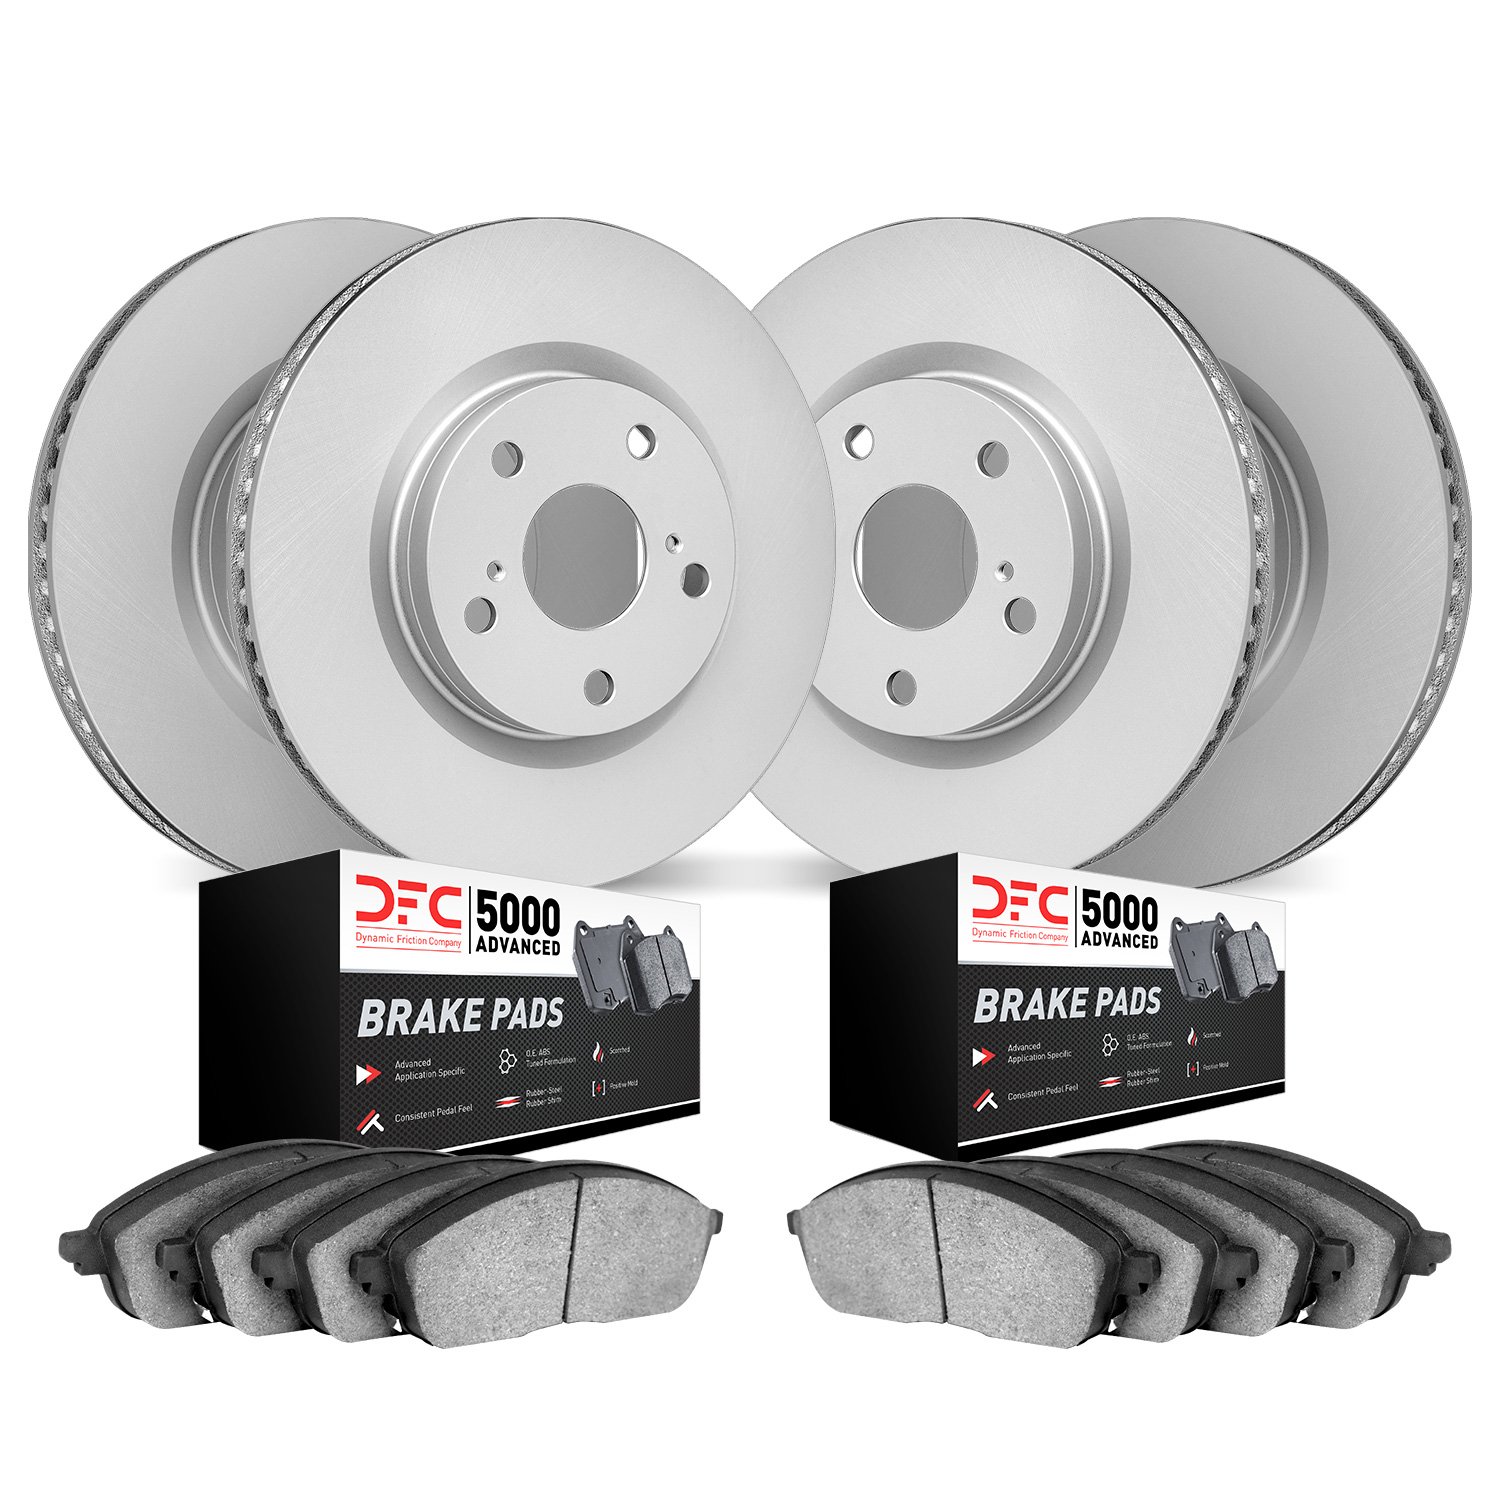 4504-76110 Geospec Brake Rotors w/5000 Advanced Brake Pads Kit, Fits Select Lexus/Toyota/Scion, Position: Front and Rear